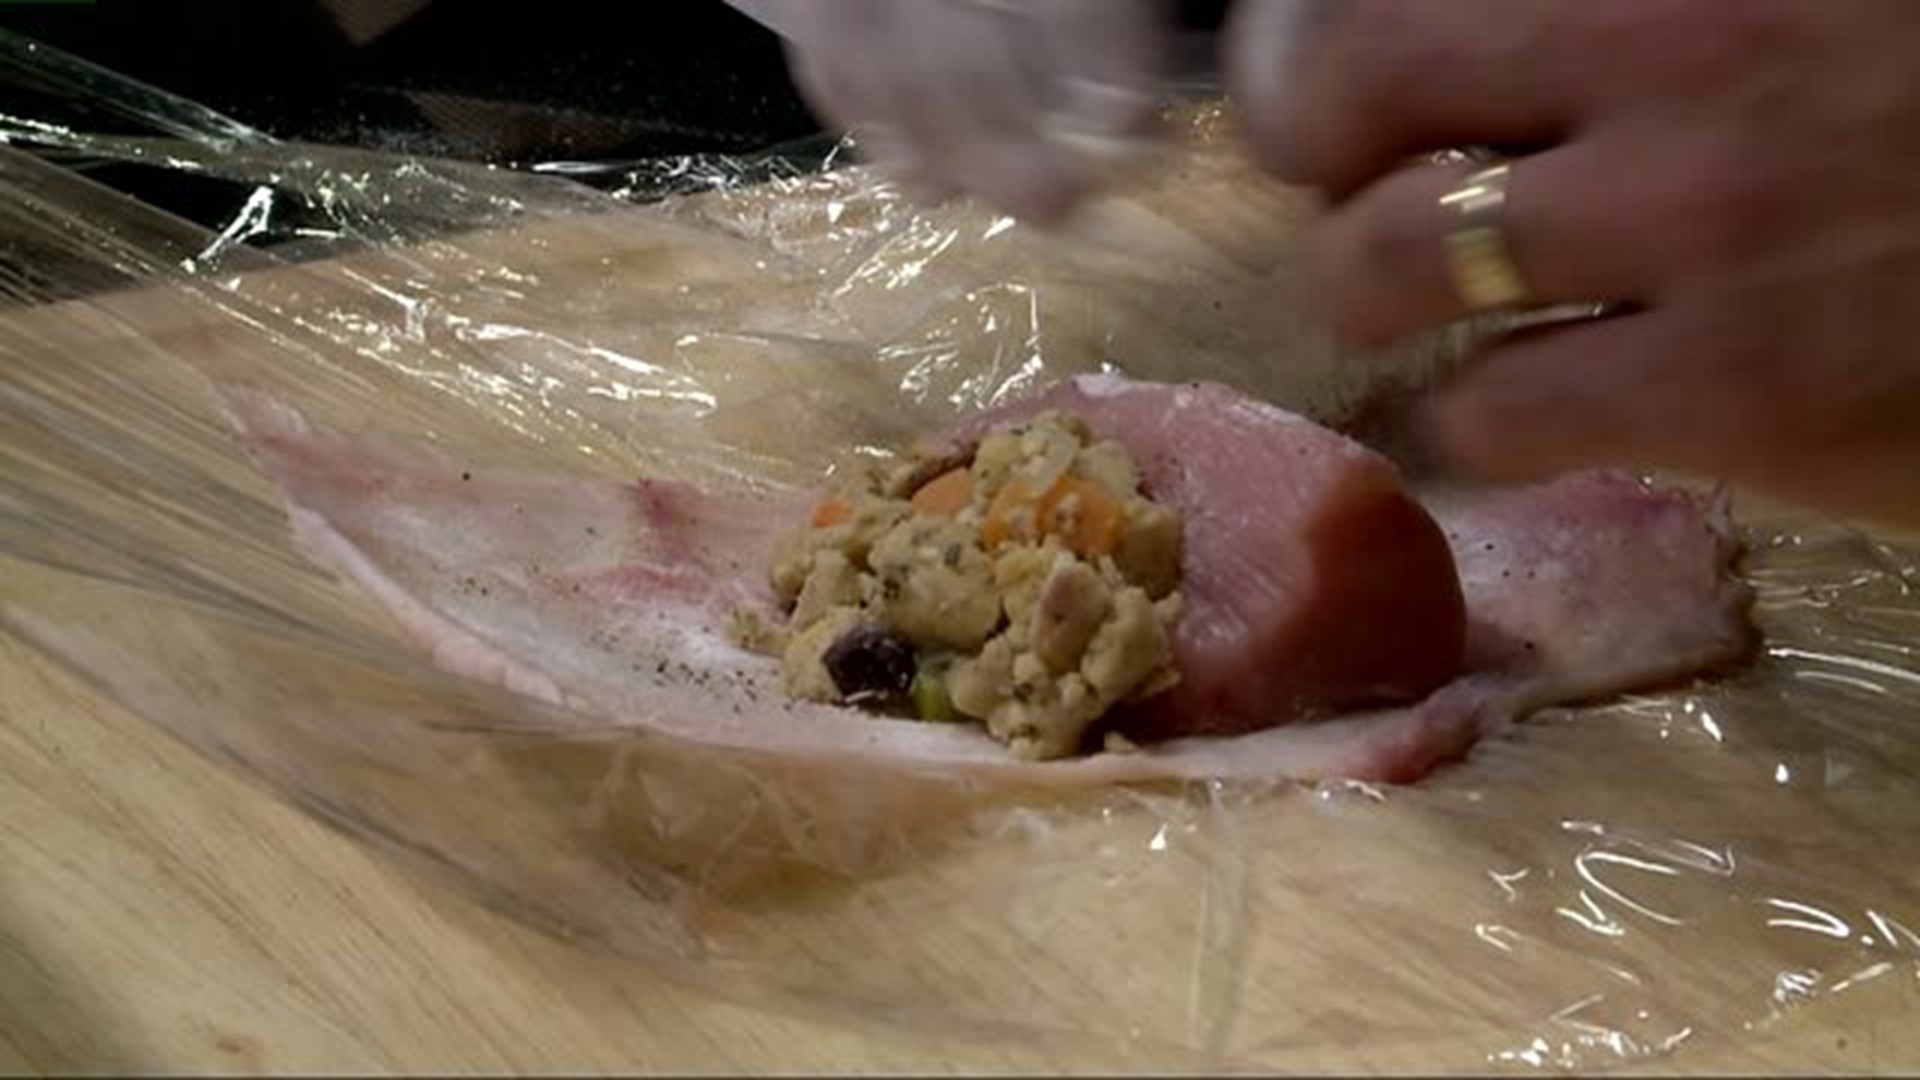 Willow Valley chef tackles preparing the turkey in the FOX43 Kitchen